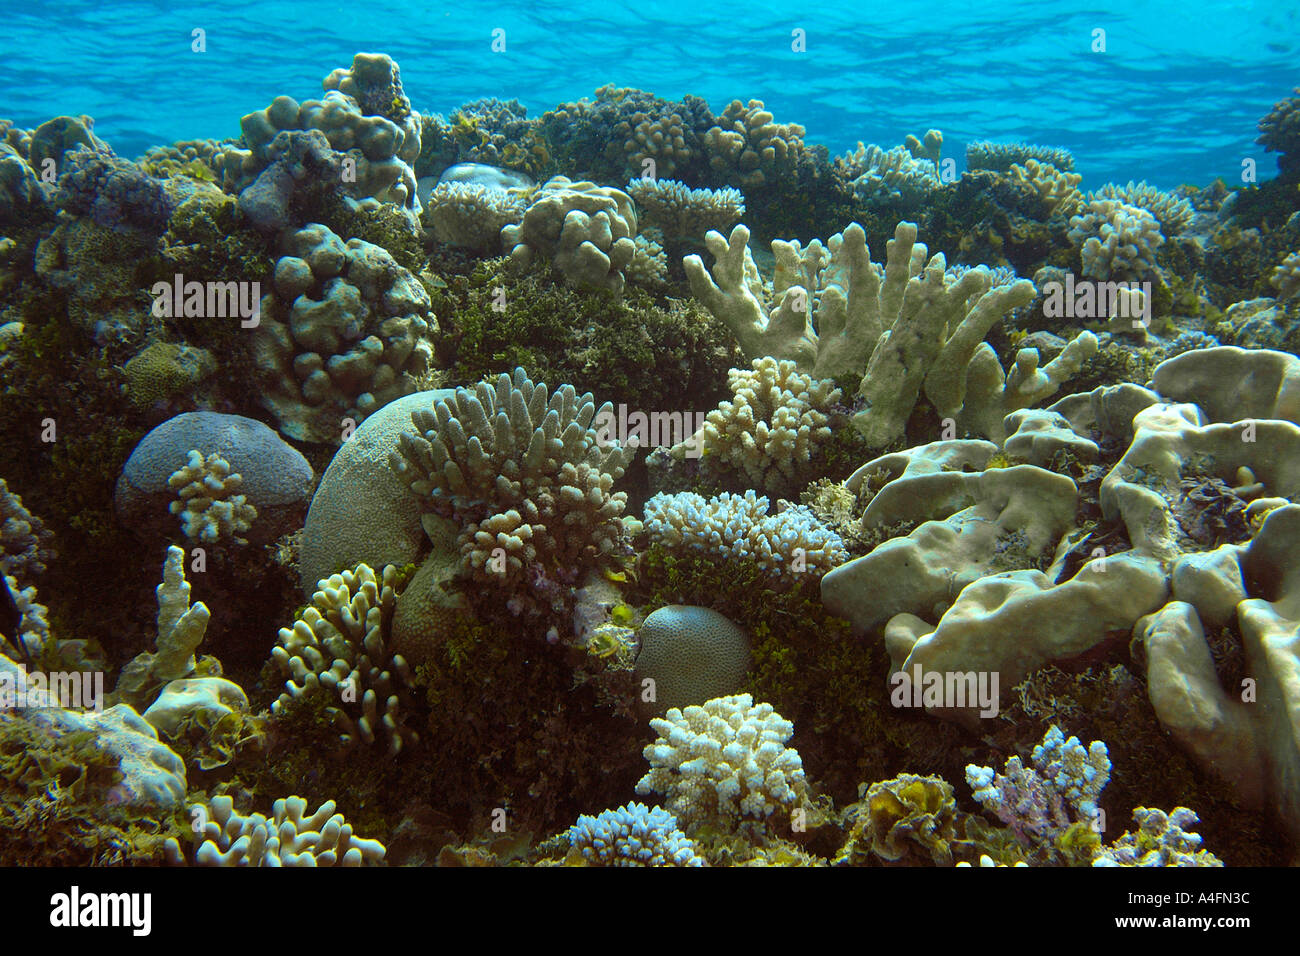 Coral reef mainly Pocillopora spp Acropora palifera and plate coral Pavona minuta right Namu atoll Marshall Islands Stock Photo